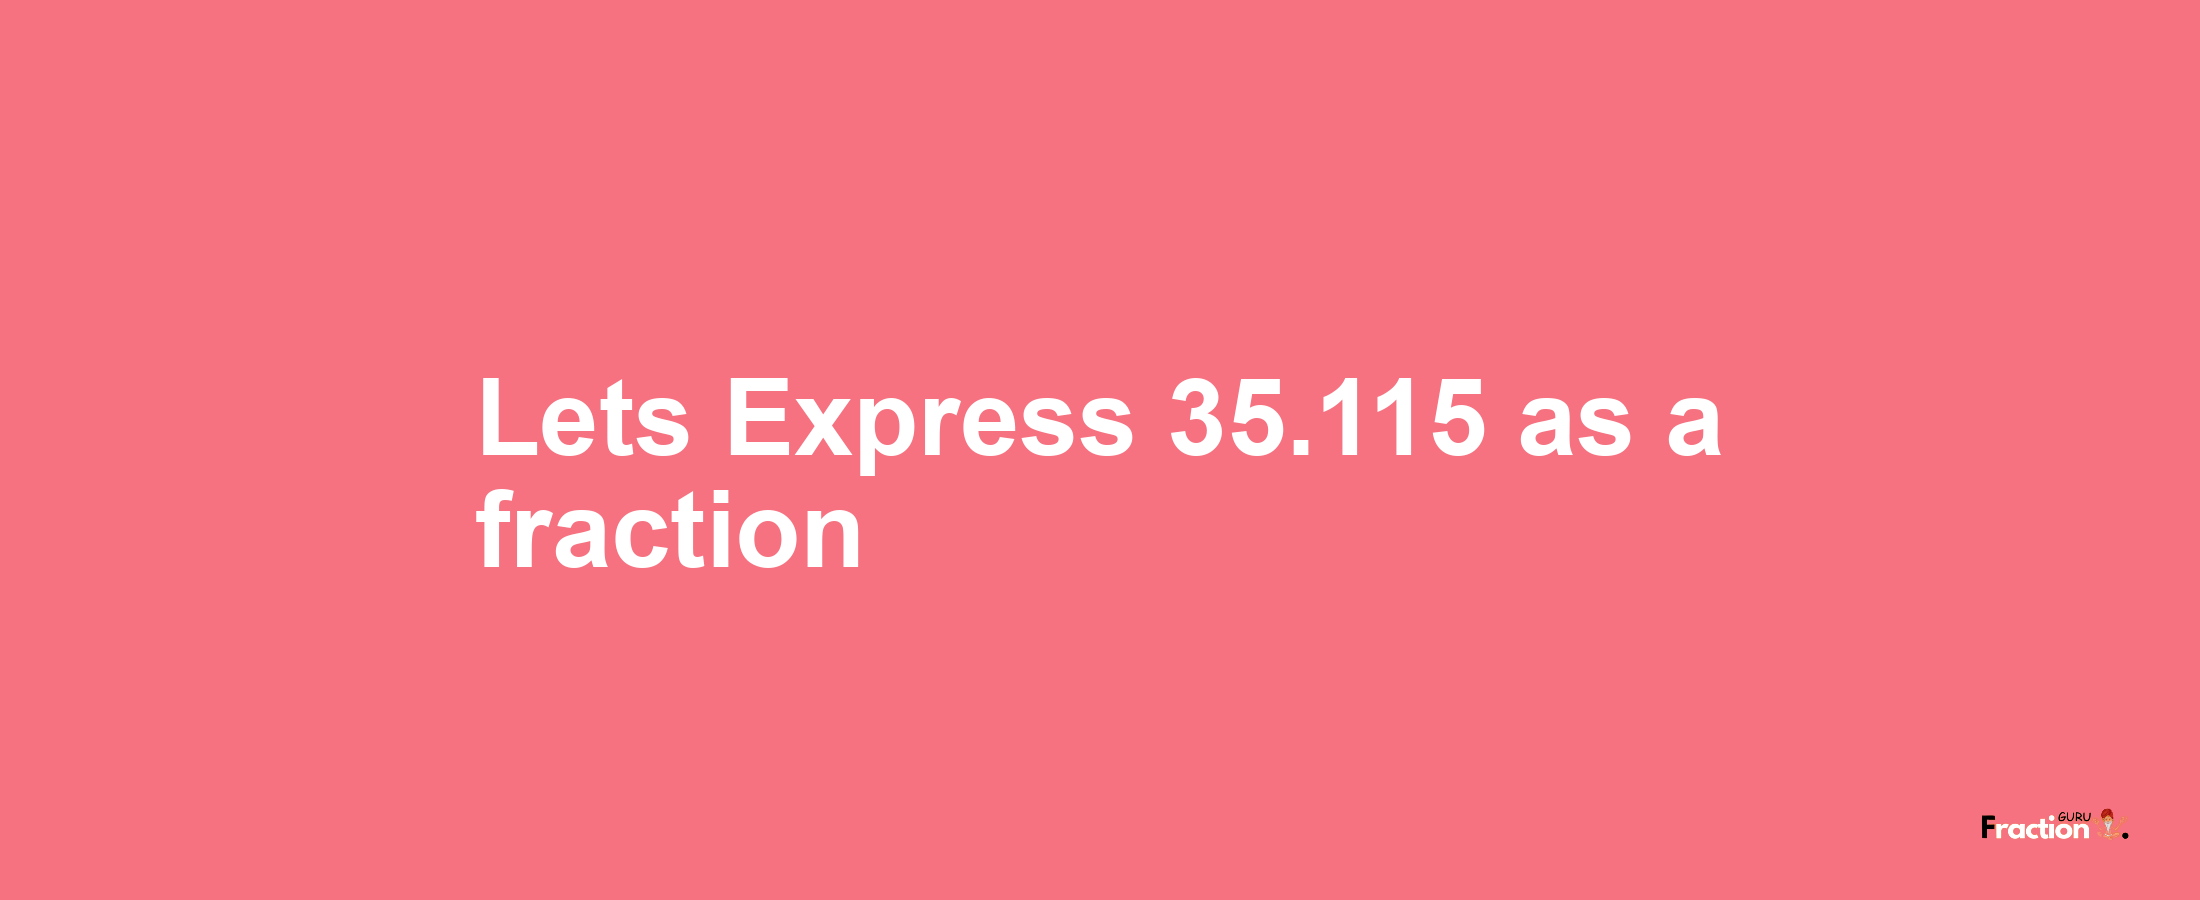 Lets Express 35.115 as afraction